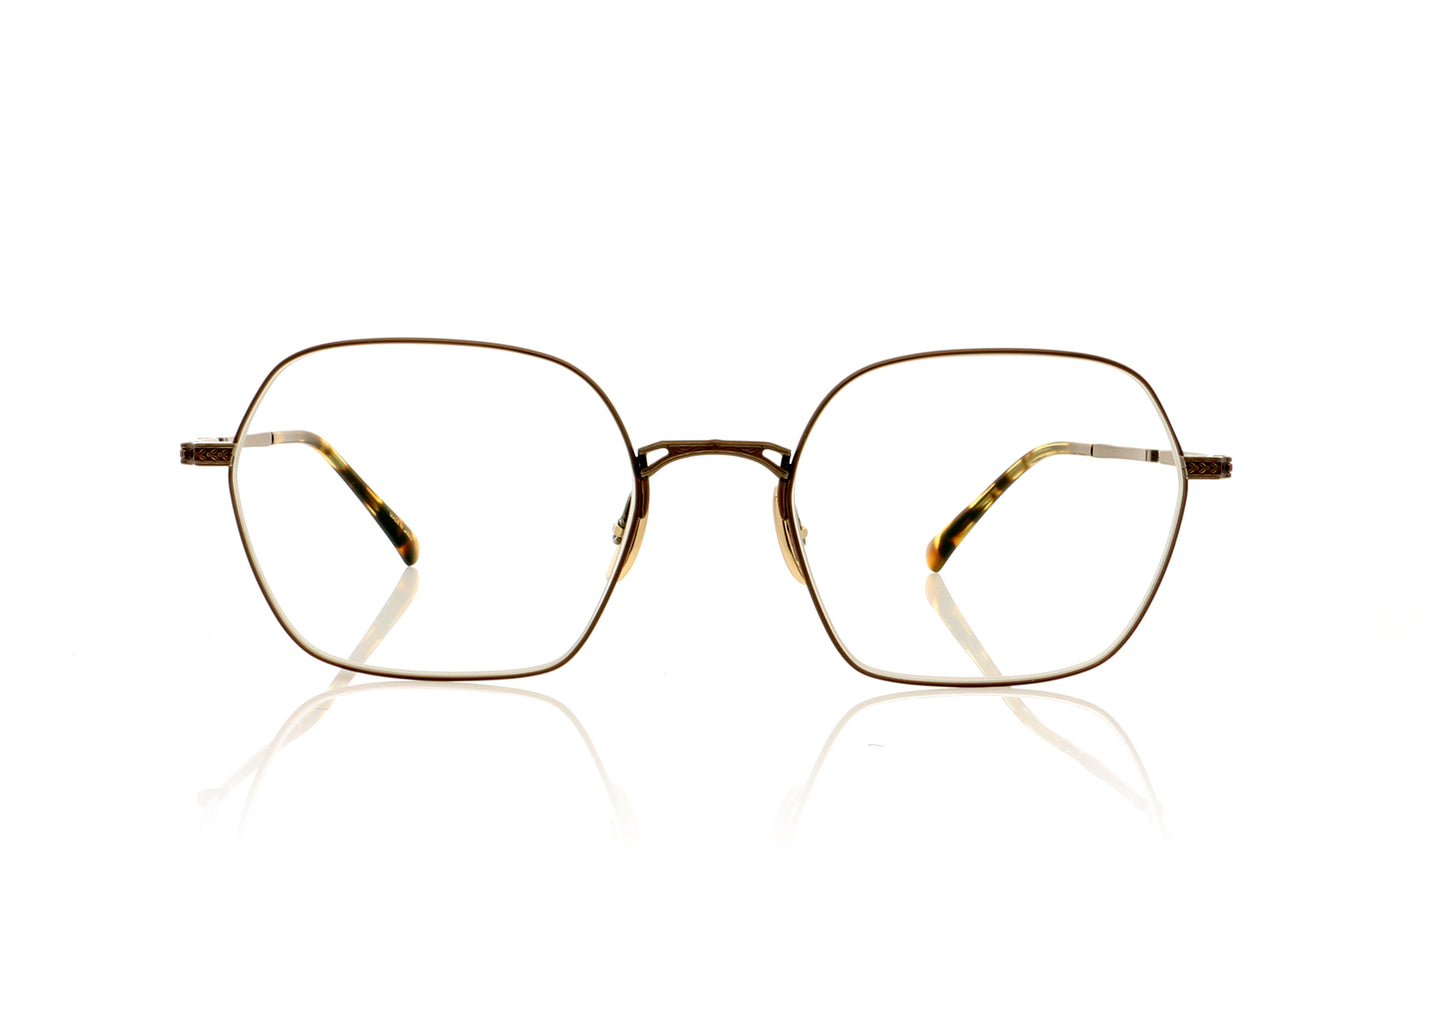 Mr. Leight Shi CG-TORT Chocolate Gold-Tortoise Glasses - Front